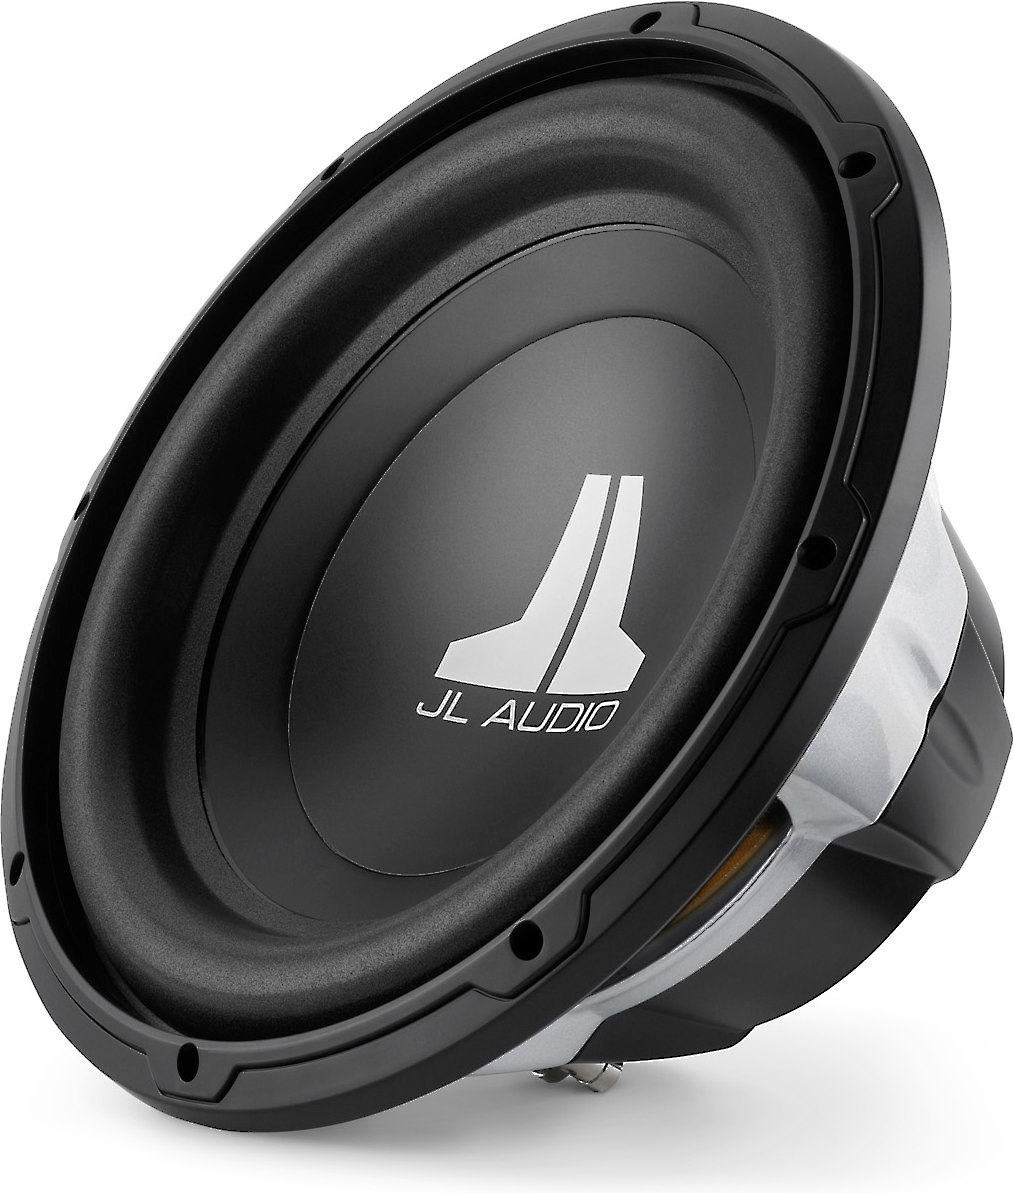 NEW 12" Subwoofer Speaker.Car Stereo Sound.twelve inch woofer.4ohm.BASS sub.12in 